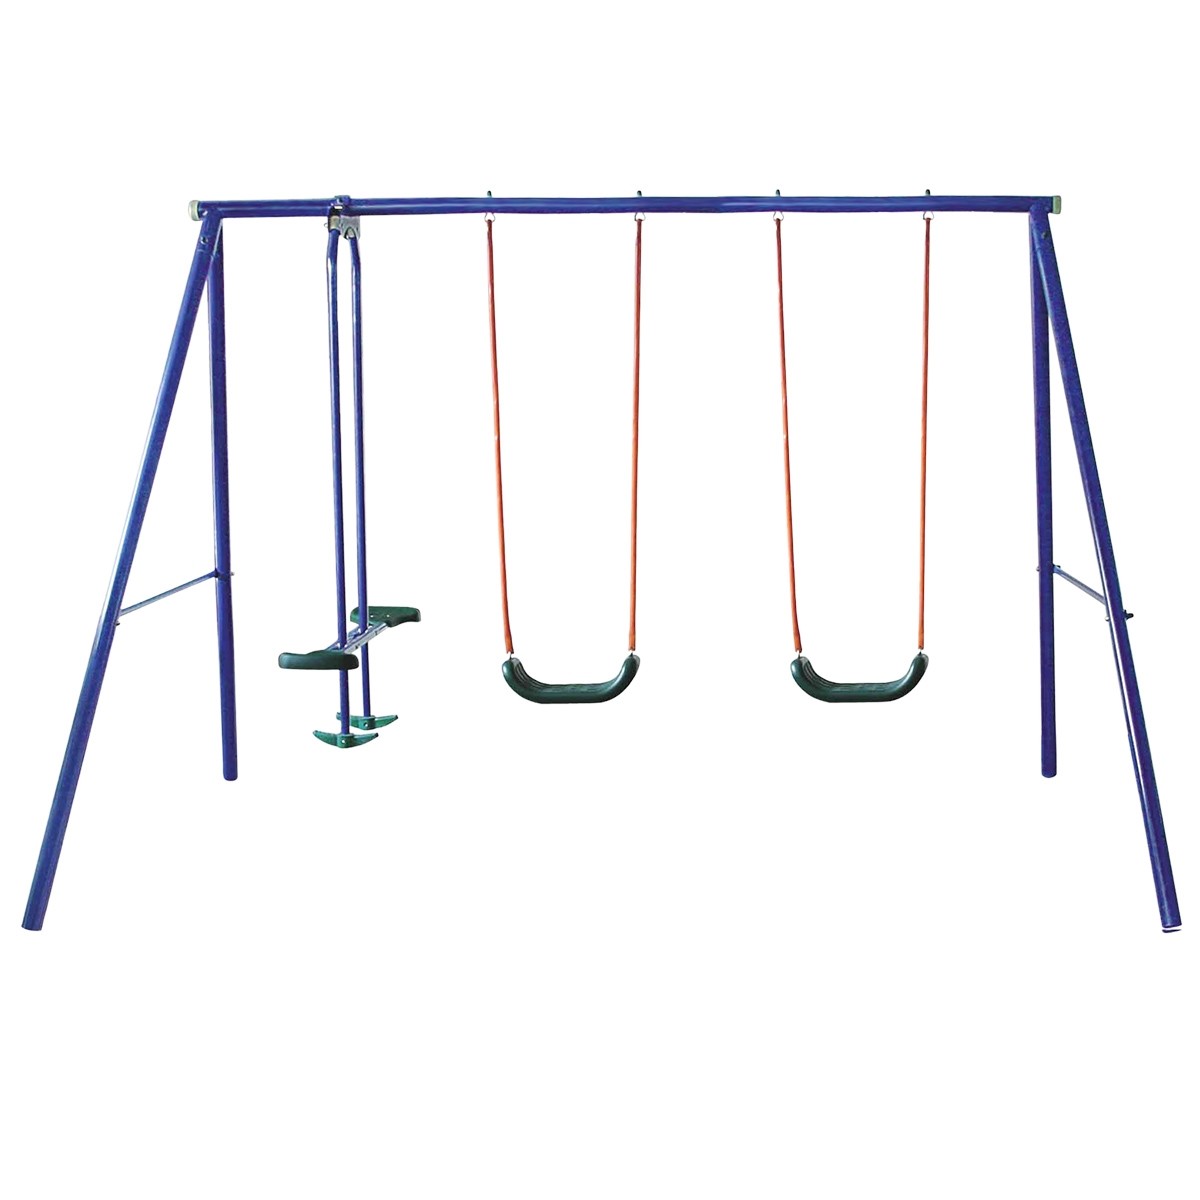 Kids Swing Set with Two Seats & One Glider